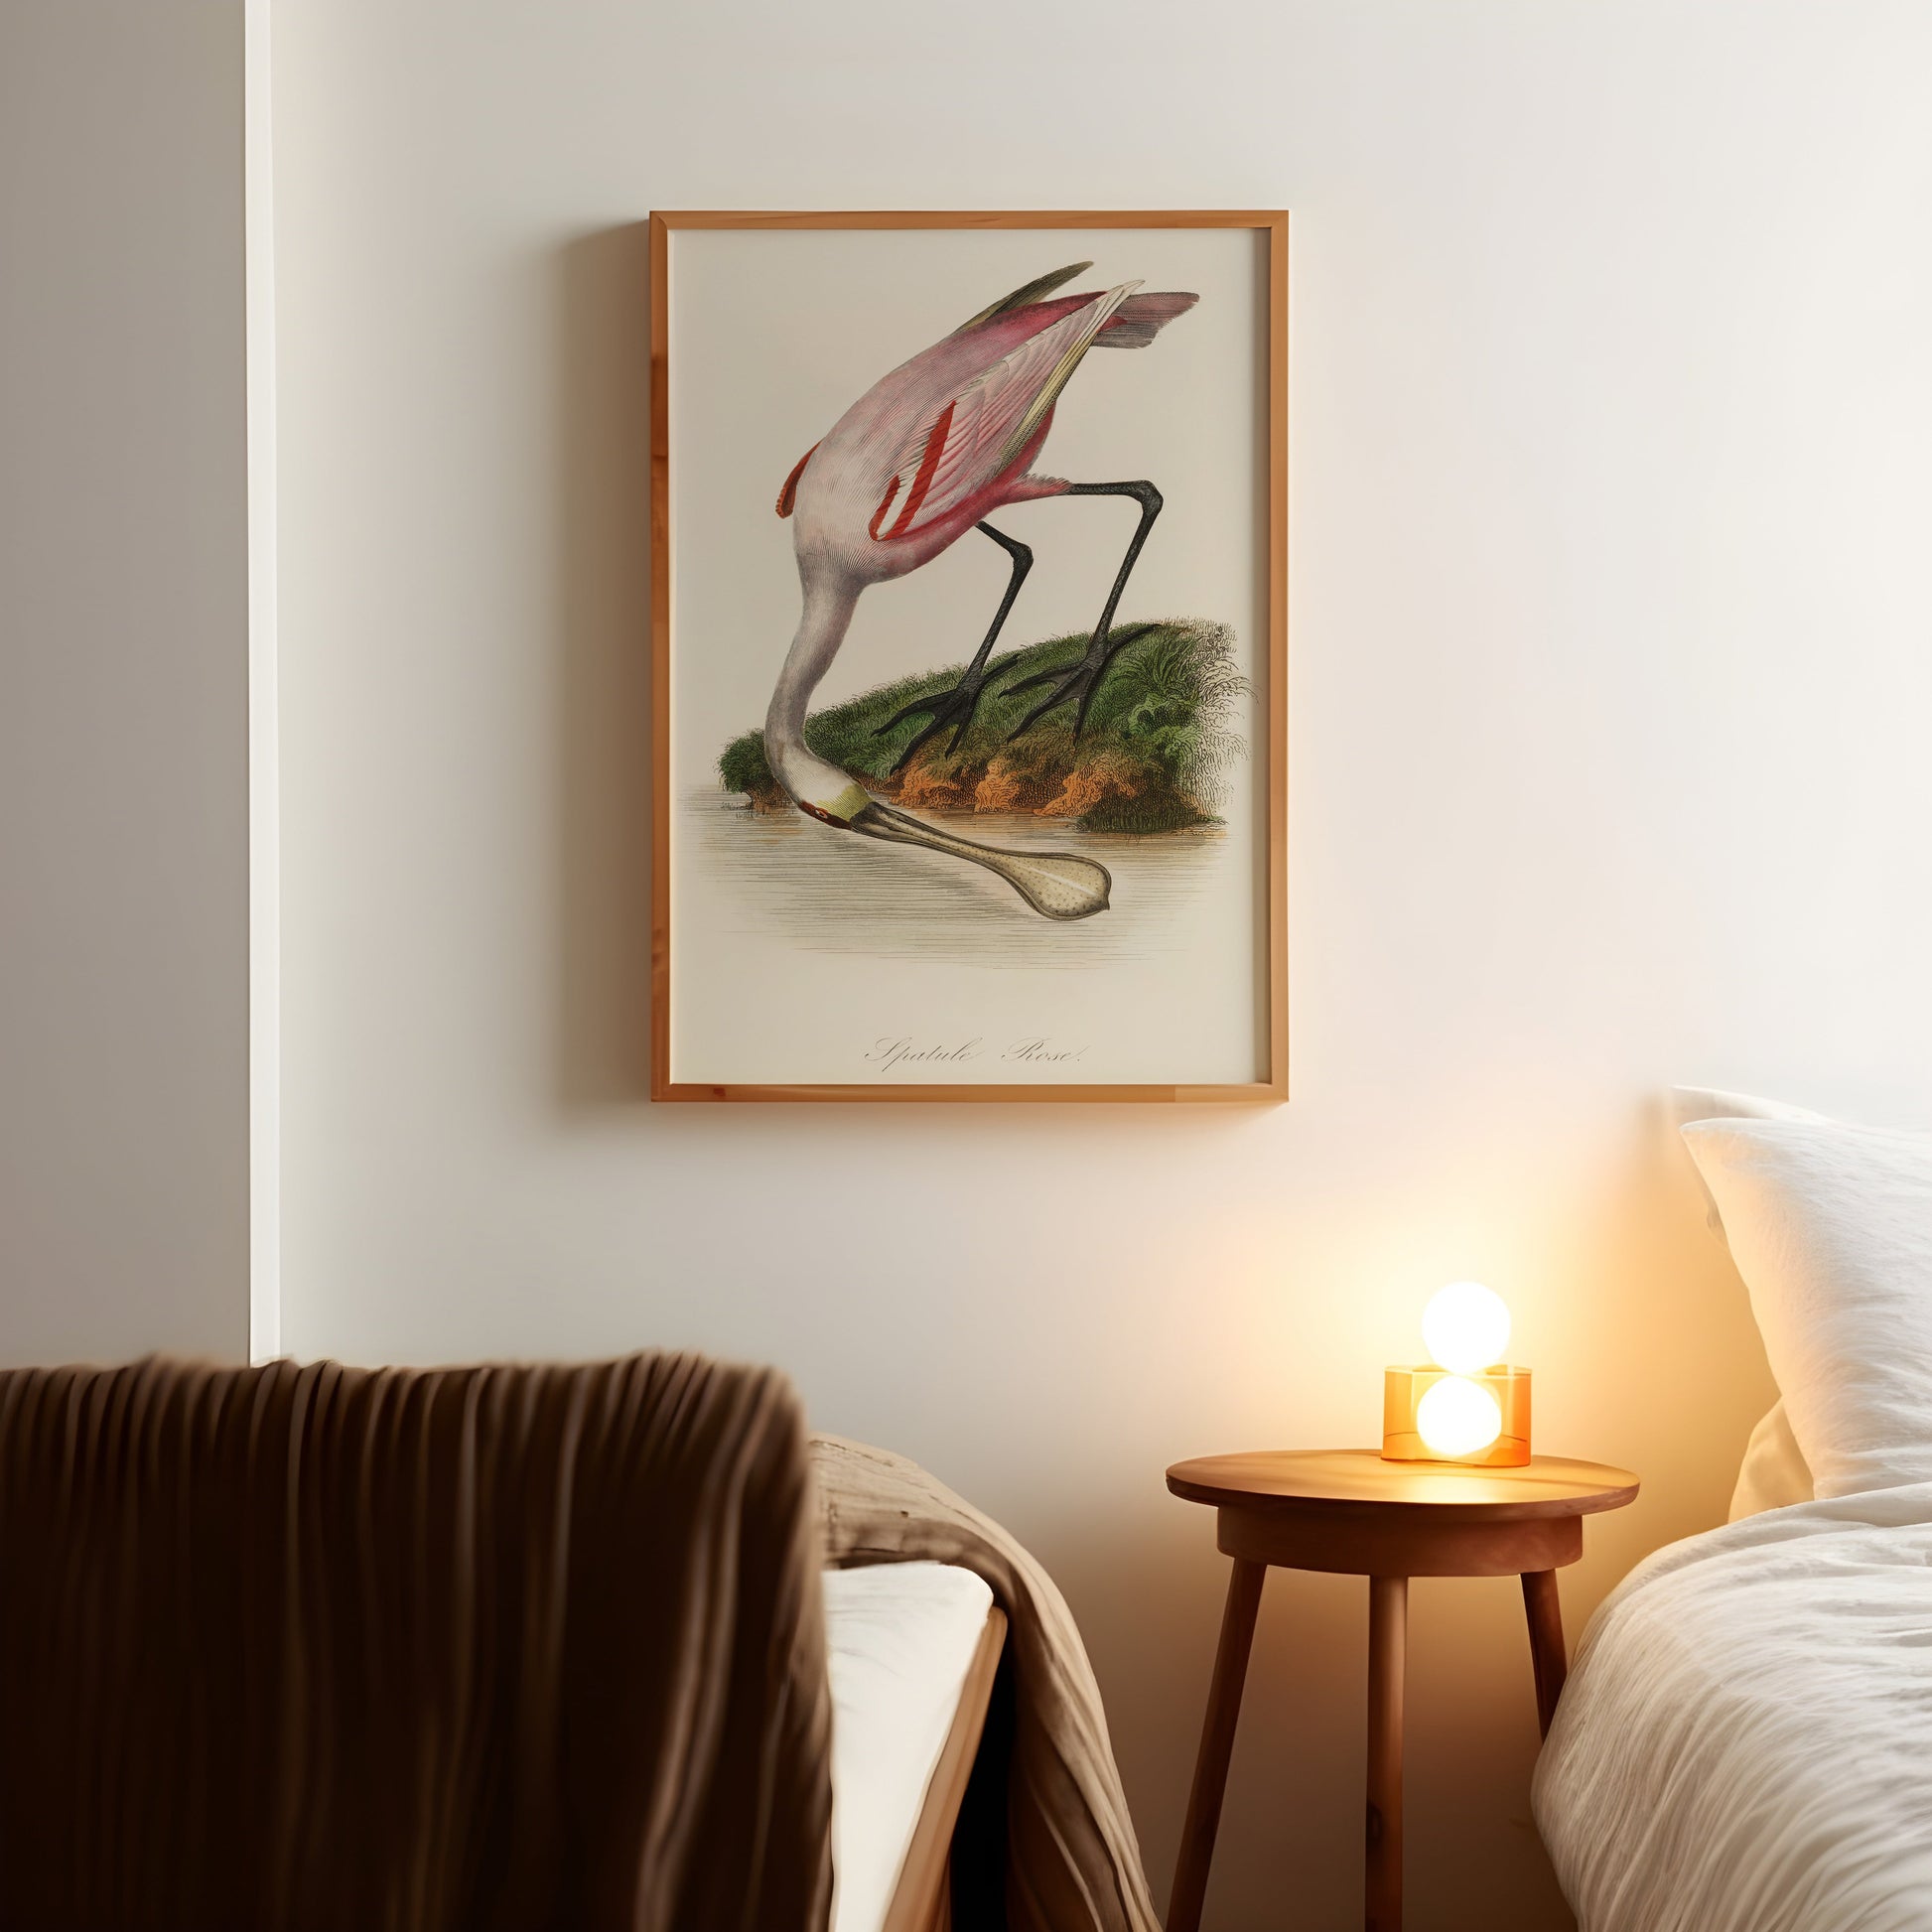 a picture of a bird on a wall above a bed